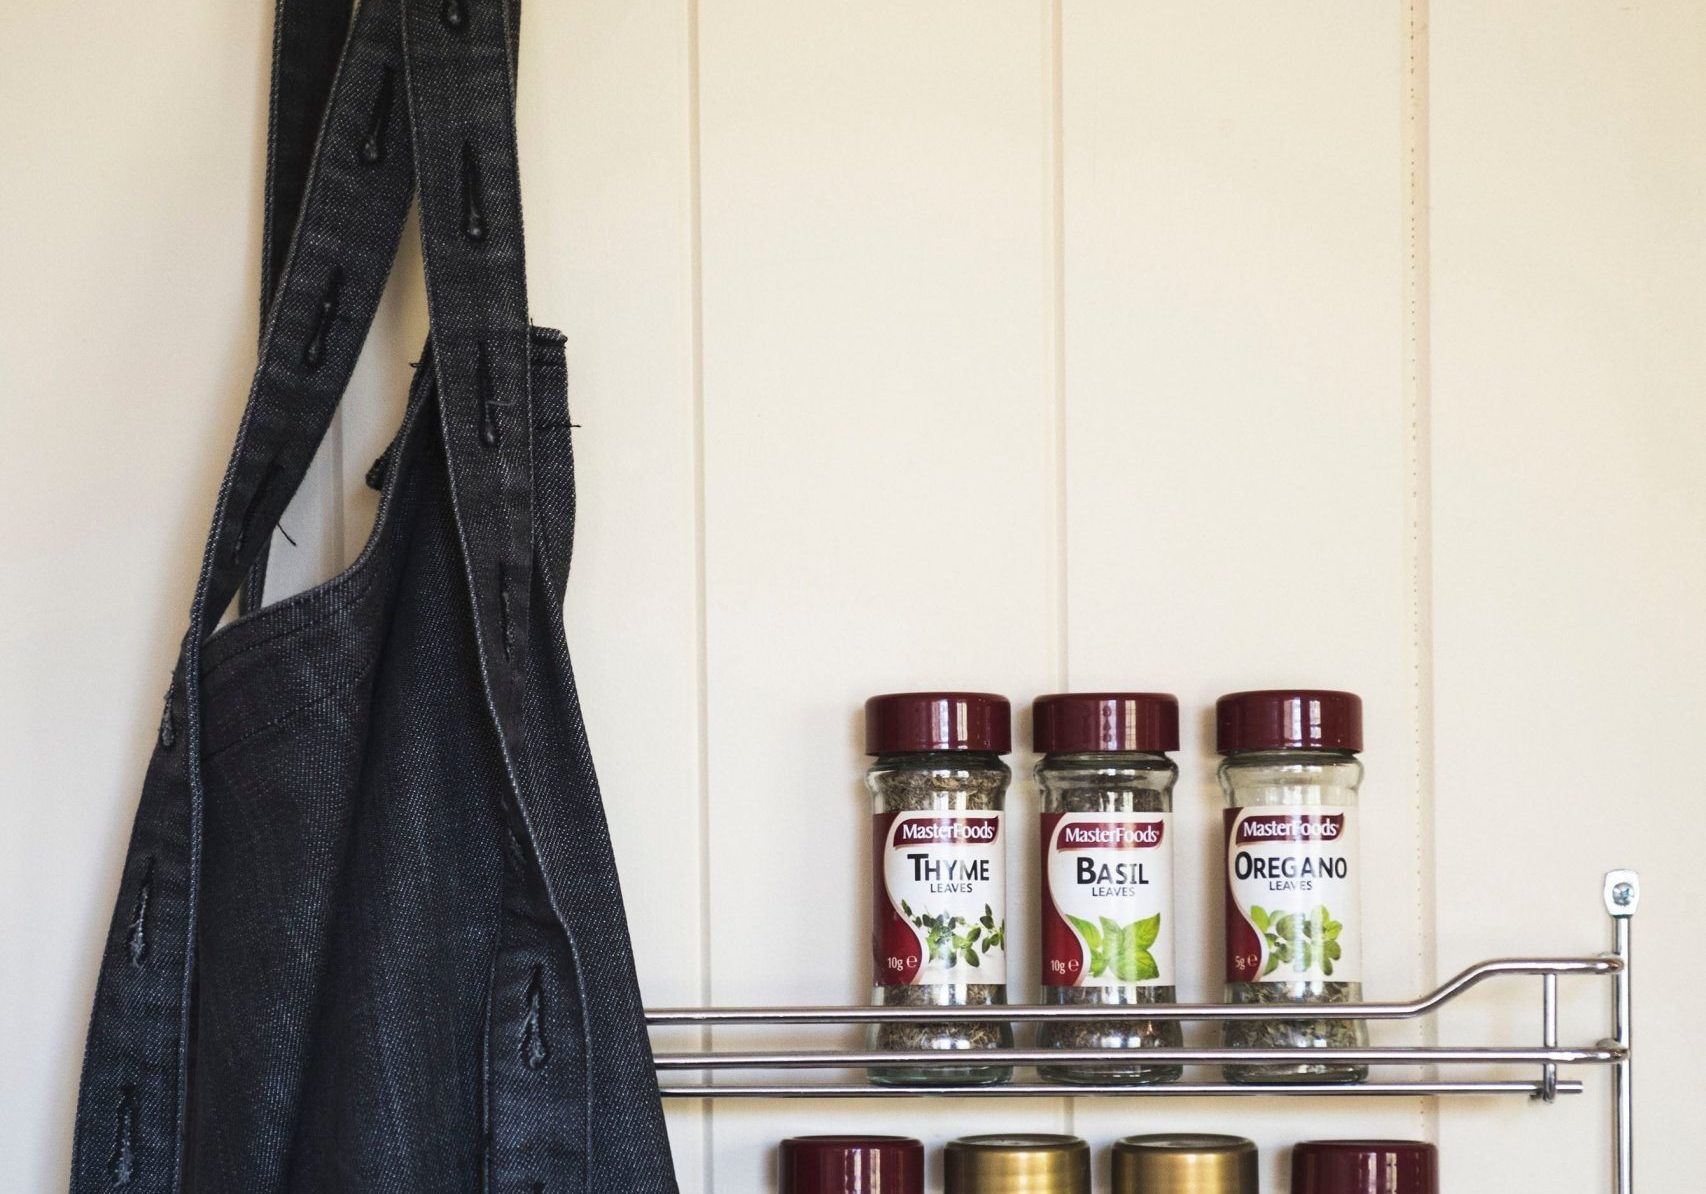 A black apron hangs next to a metal rack holding six jars of spices, including thyme, basil, oregano, garlic, Tuscan seasoning, and barbecue seasoning, on a white paneled wall.